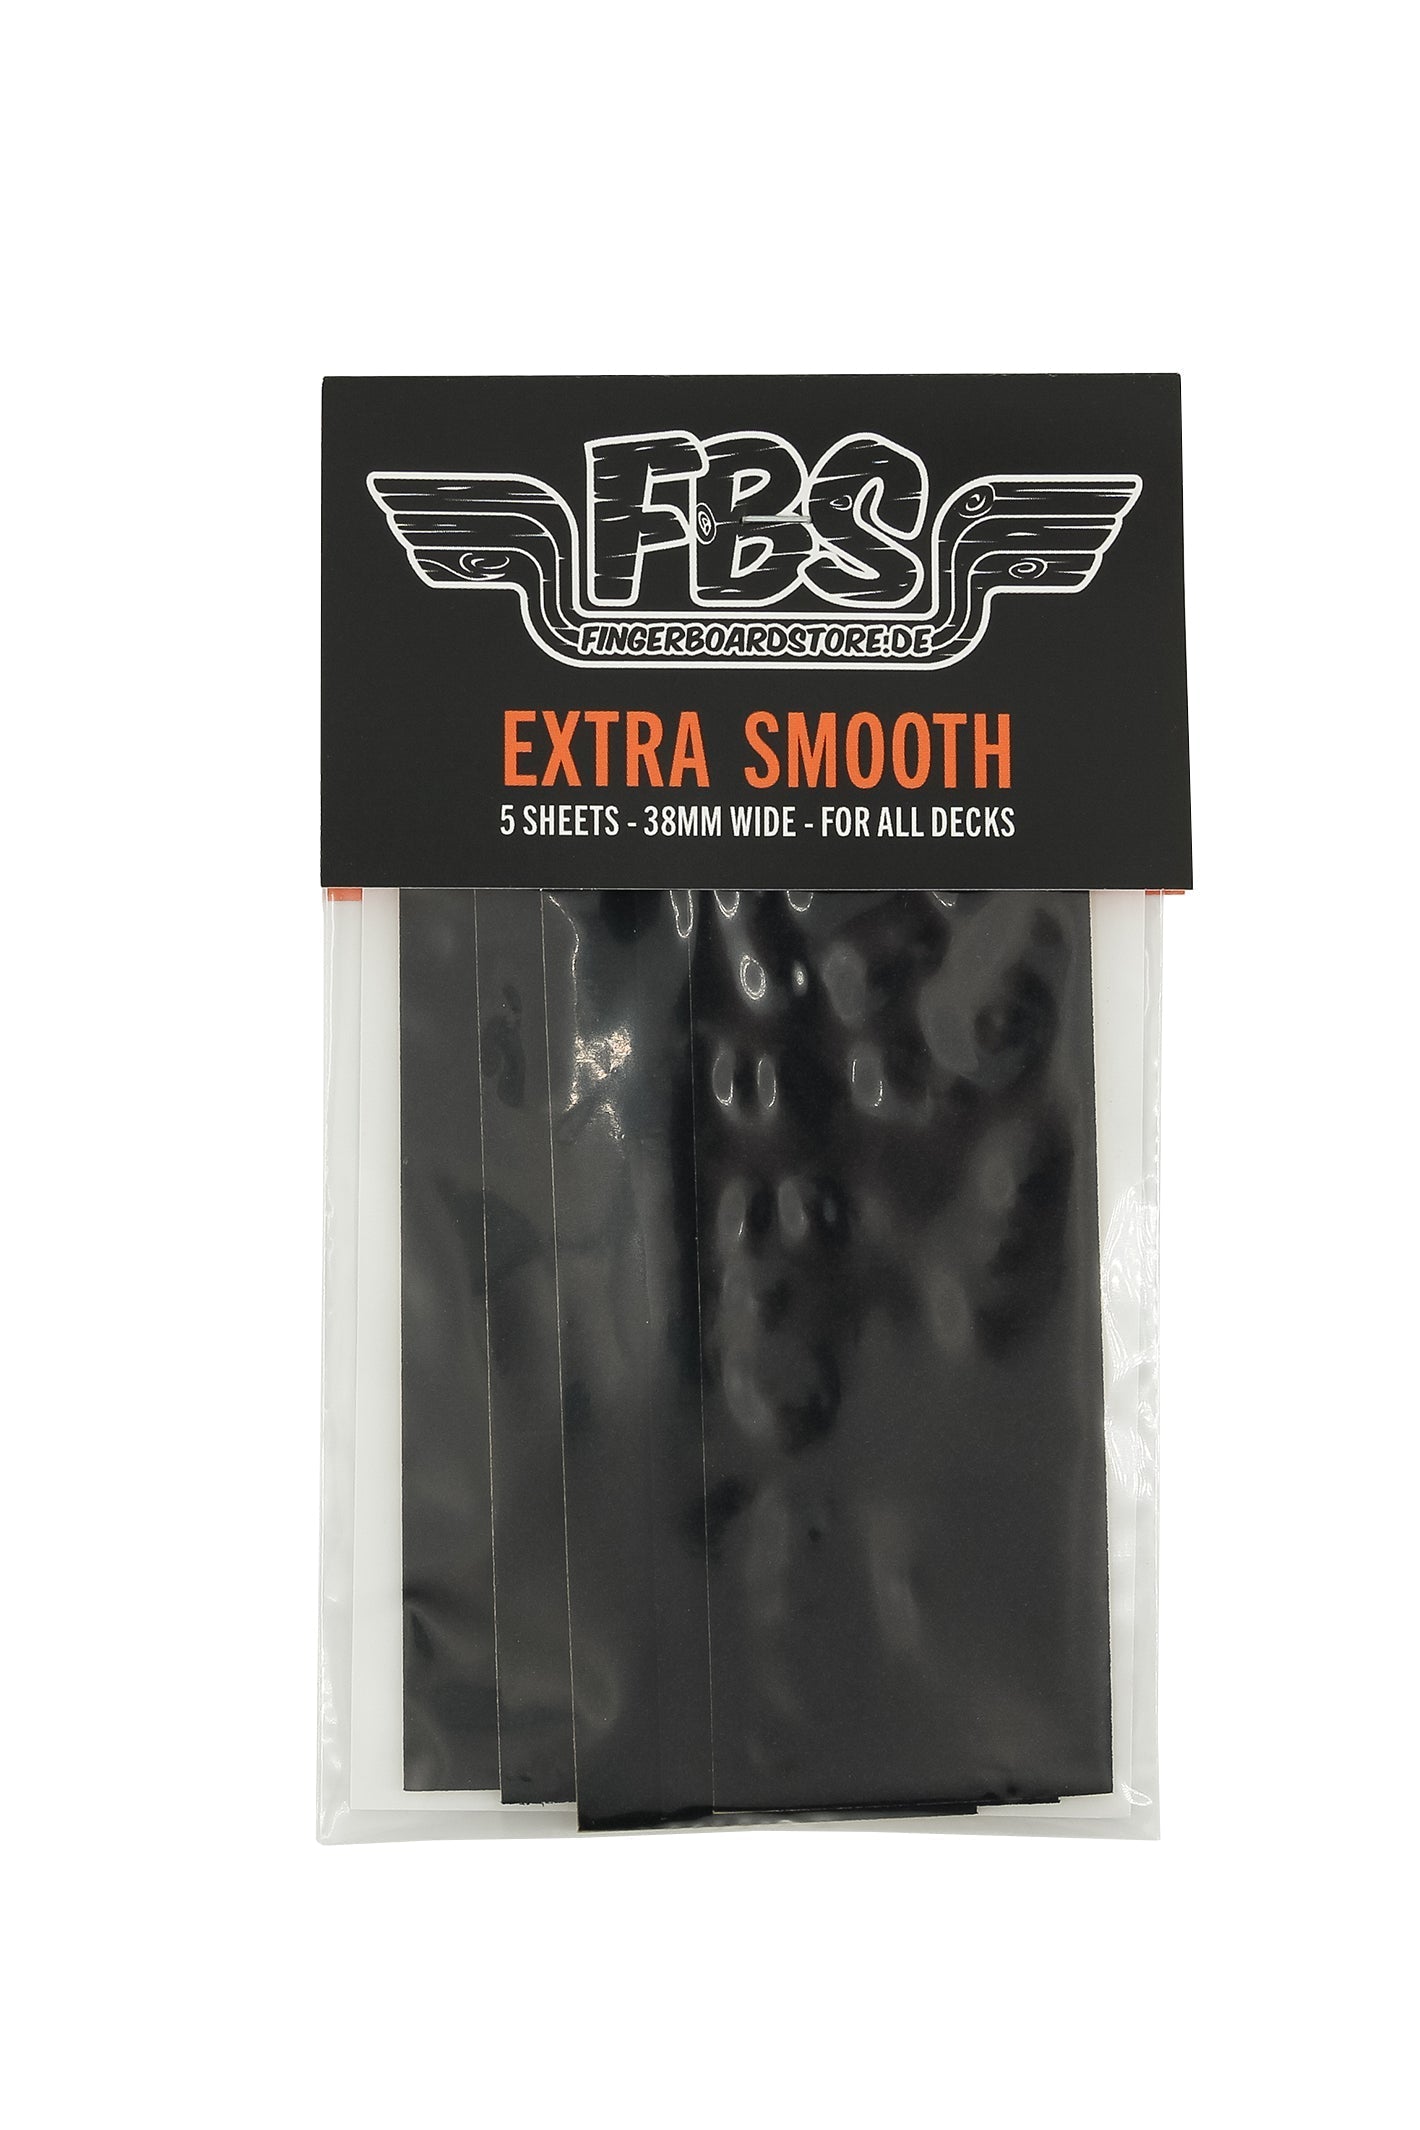 FBS Extra Smooth 10er Pack